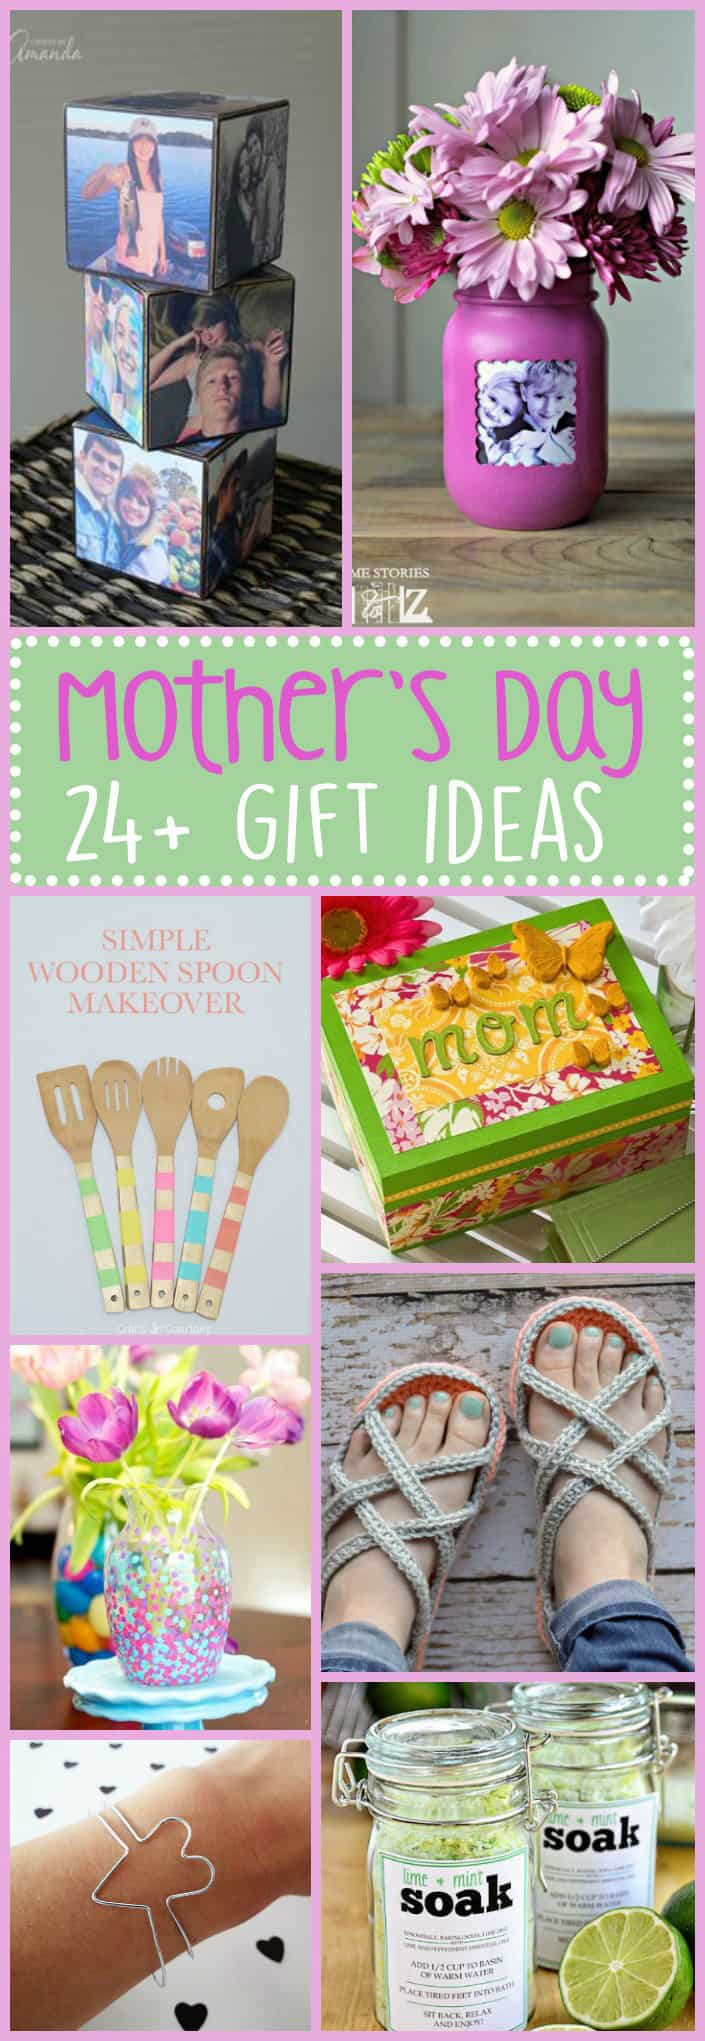 Cool Mothers Day Ideas
 Mother s Day Gift Ideas 24 t ideas for Mother s Day